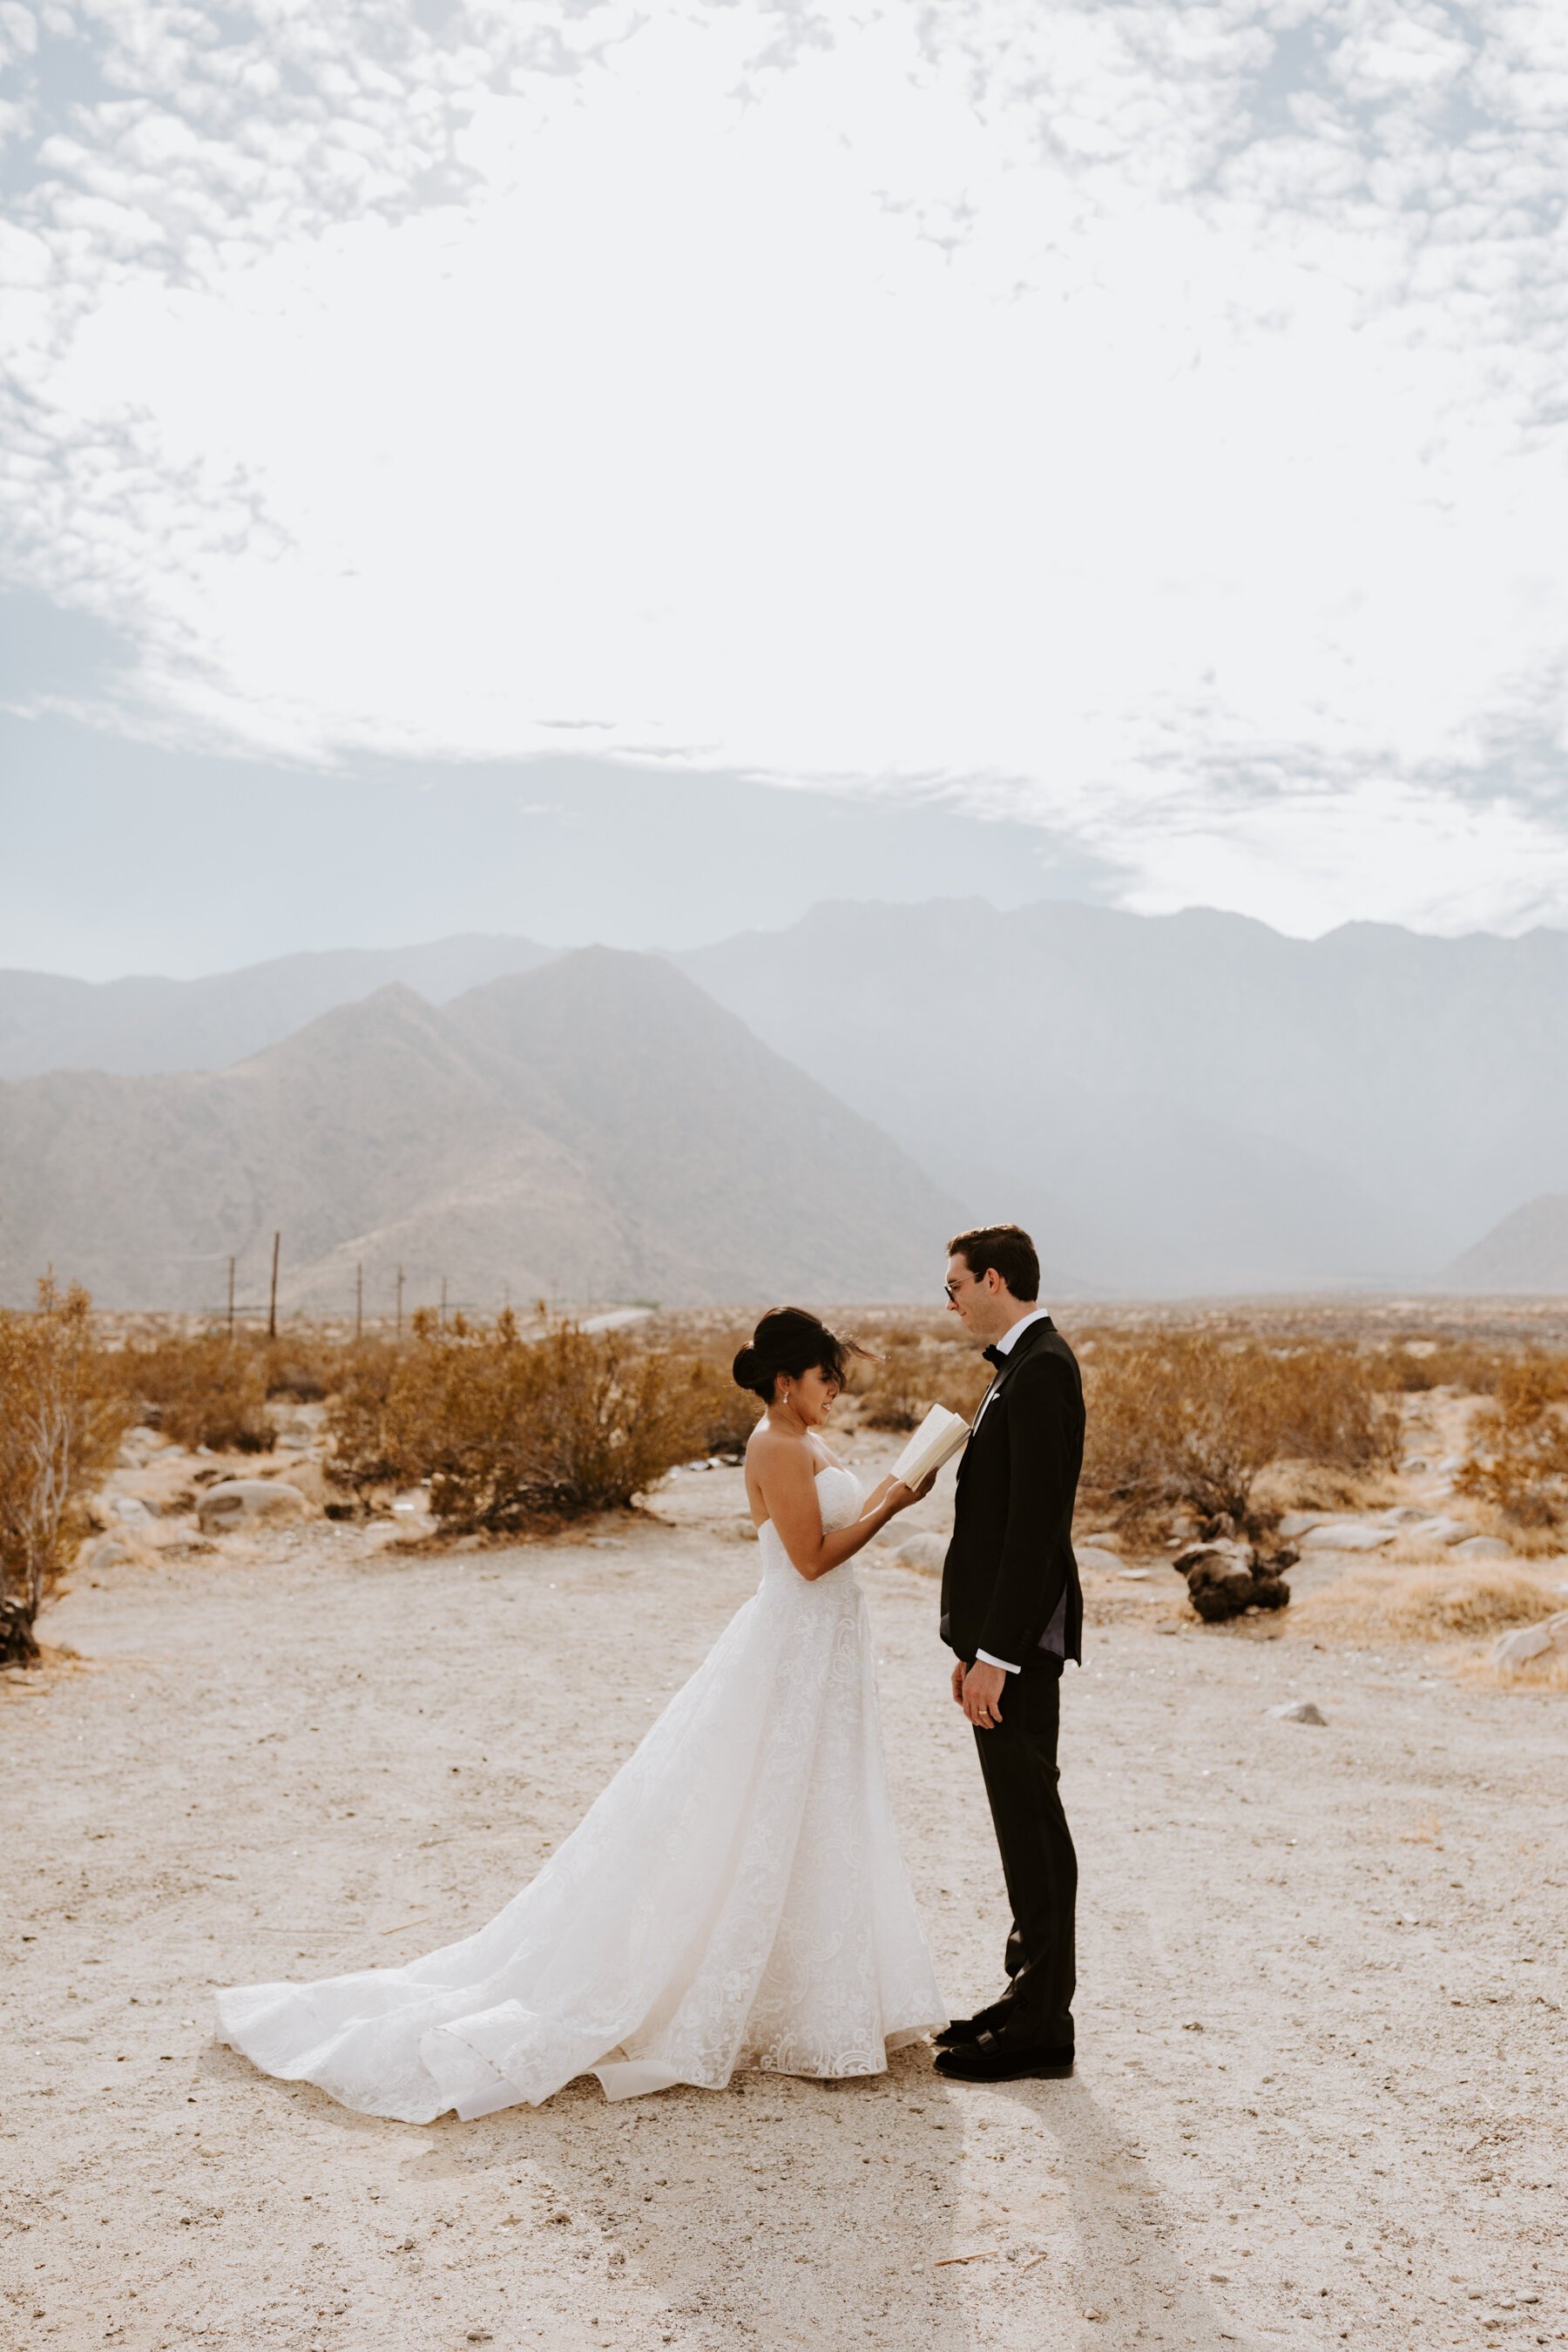 Bride and Groom reading private vows to each other in Palm Springs, Palm Springs Wedding and Elopement Photographer, Photo by Tida Svy